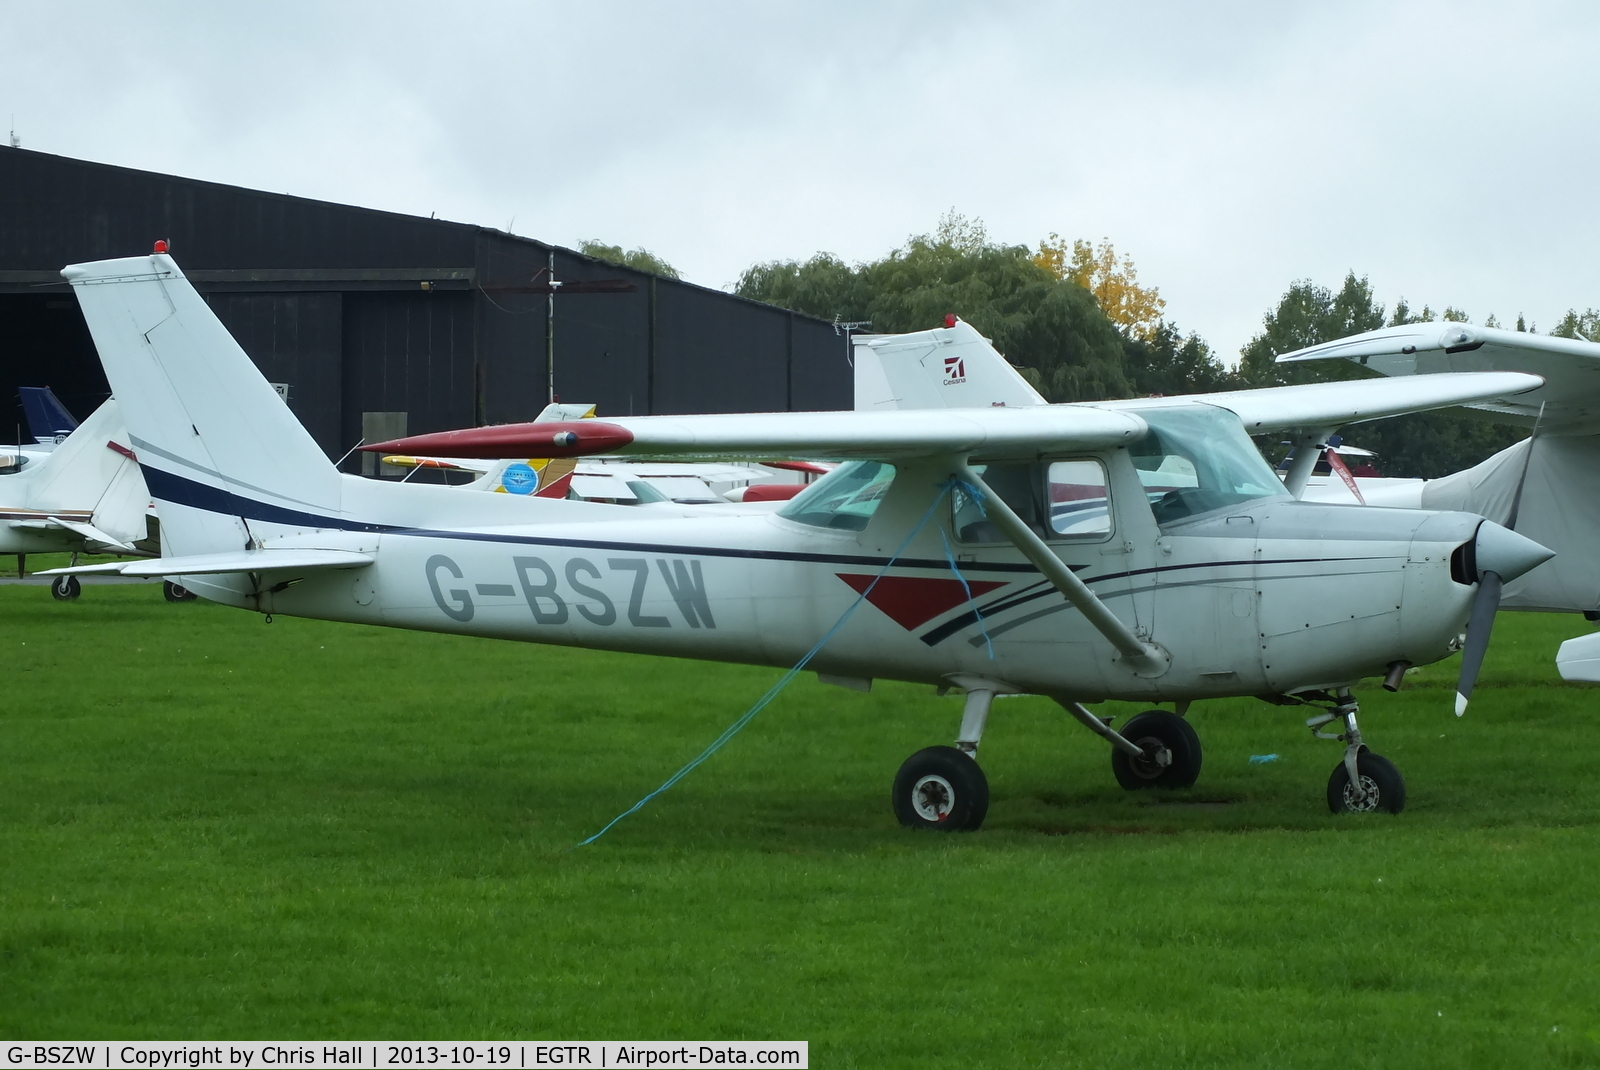 G-BSZW, 1977 Cessna 152 C/N 152-81072, privately owned